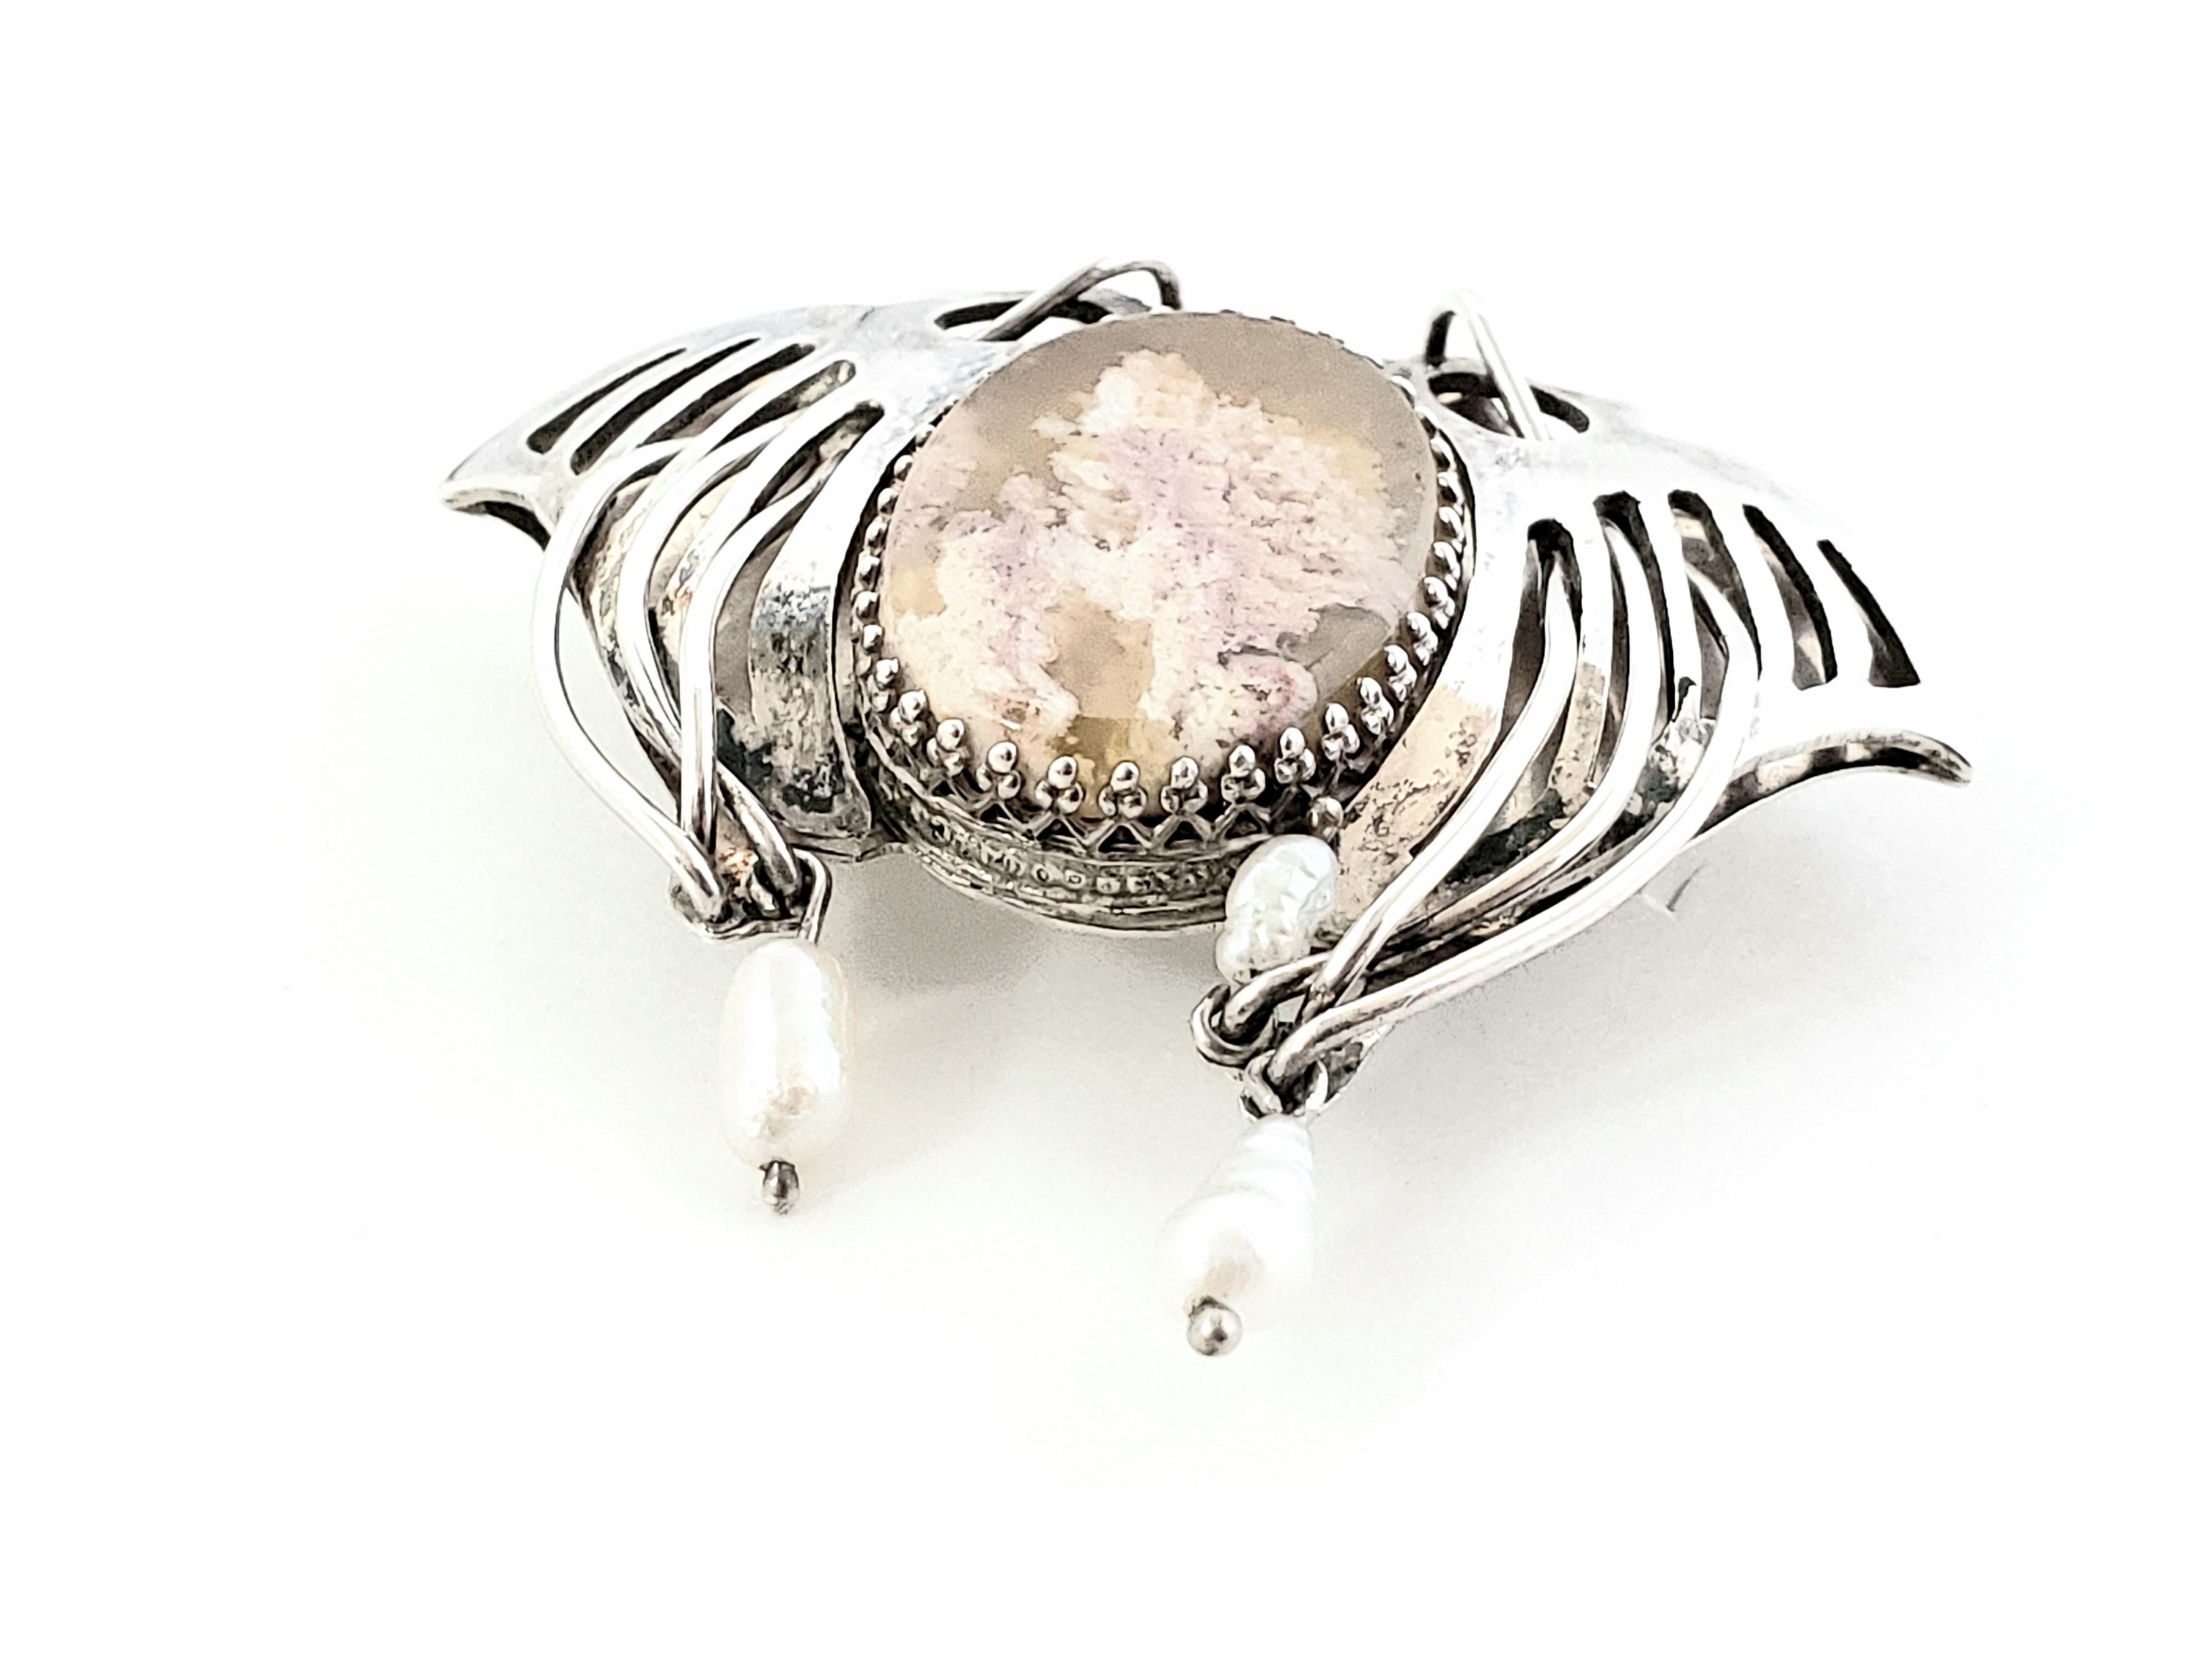 Handmade Artisan Sterling Silver Laguna Lace Agate and Pearl Wing Slide Pendant

This beautiful Handmade Artisan Laguna Lace Agate Wing Slide Pendant is set in sterling silver and accented with pearls. The pendant screams handmade and one of a kind